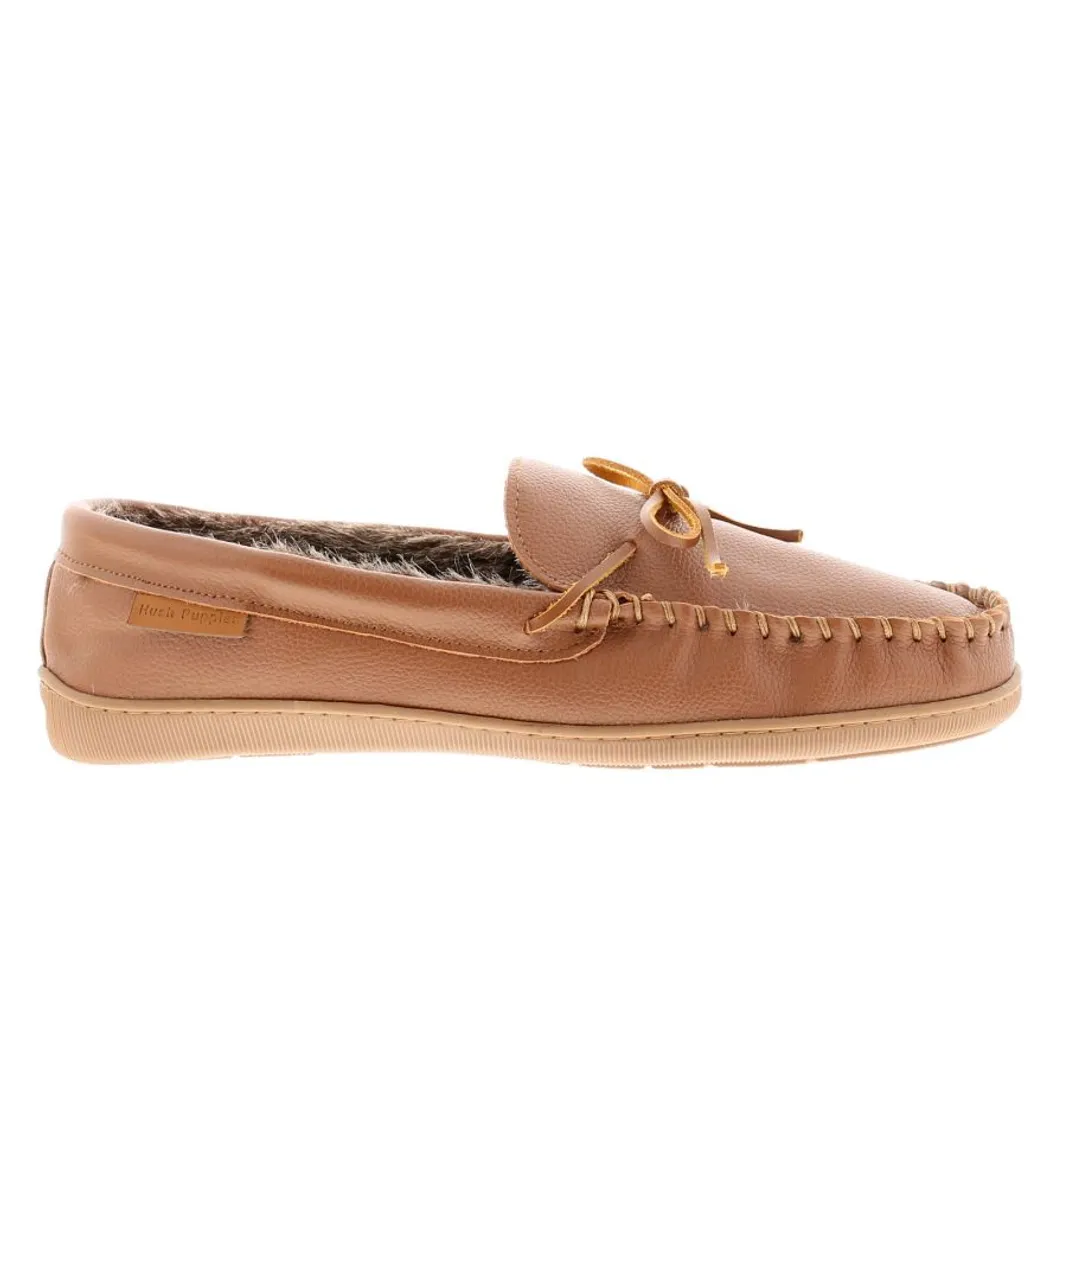 Hush Puppies Ace Slip On MEMORY FOAM Slippers Mens - Tan Leather